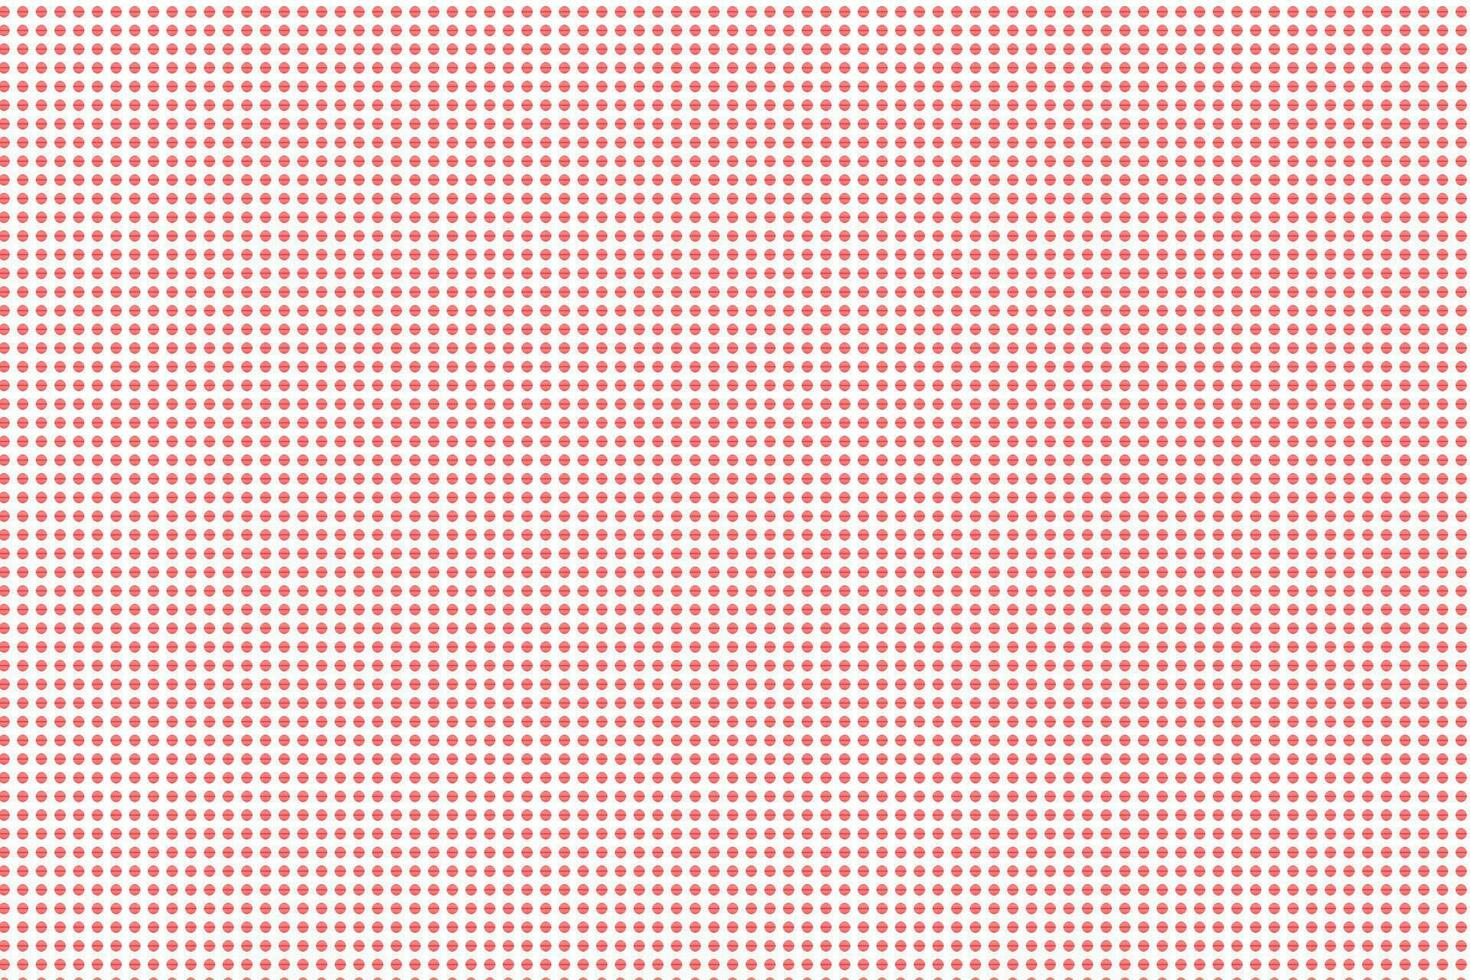 simple small red polka dot pattern on white background vector